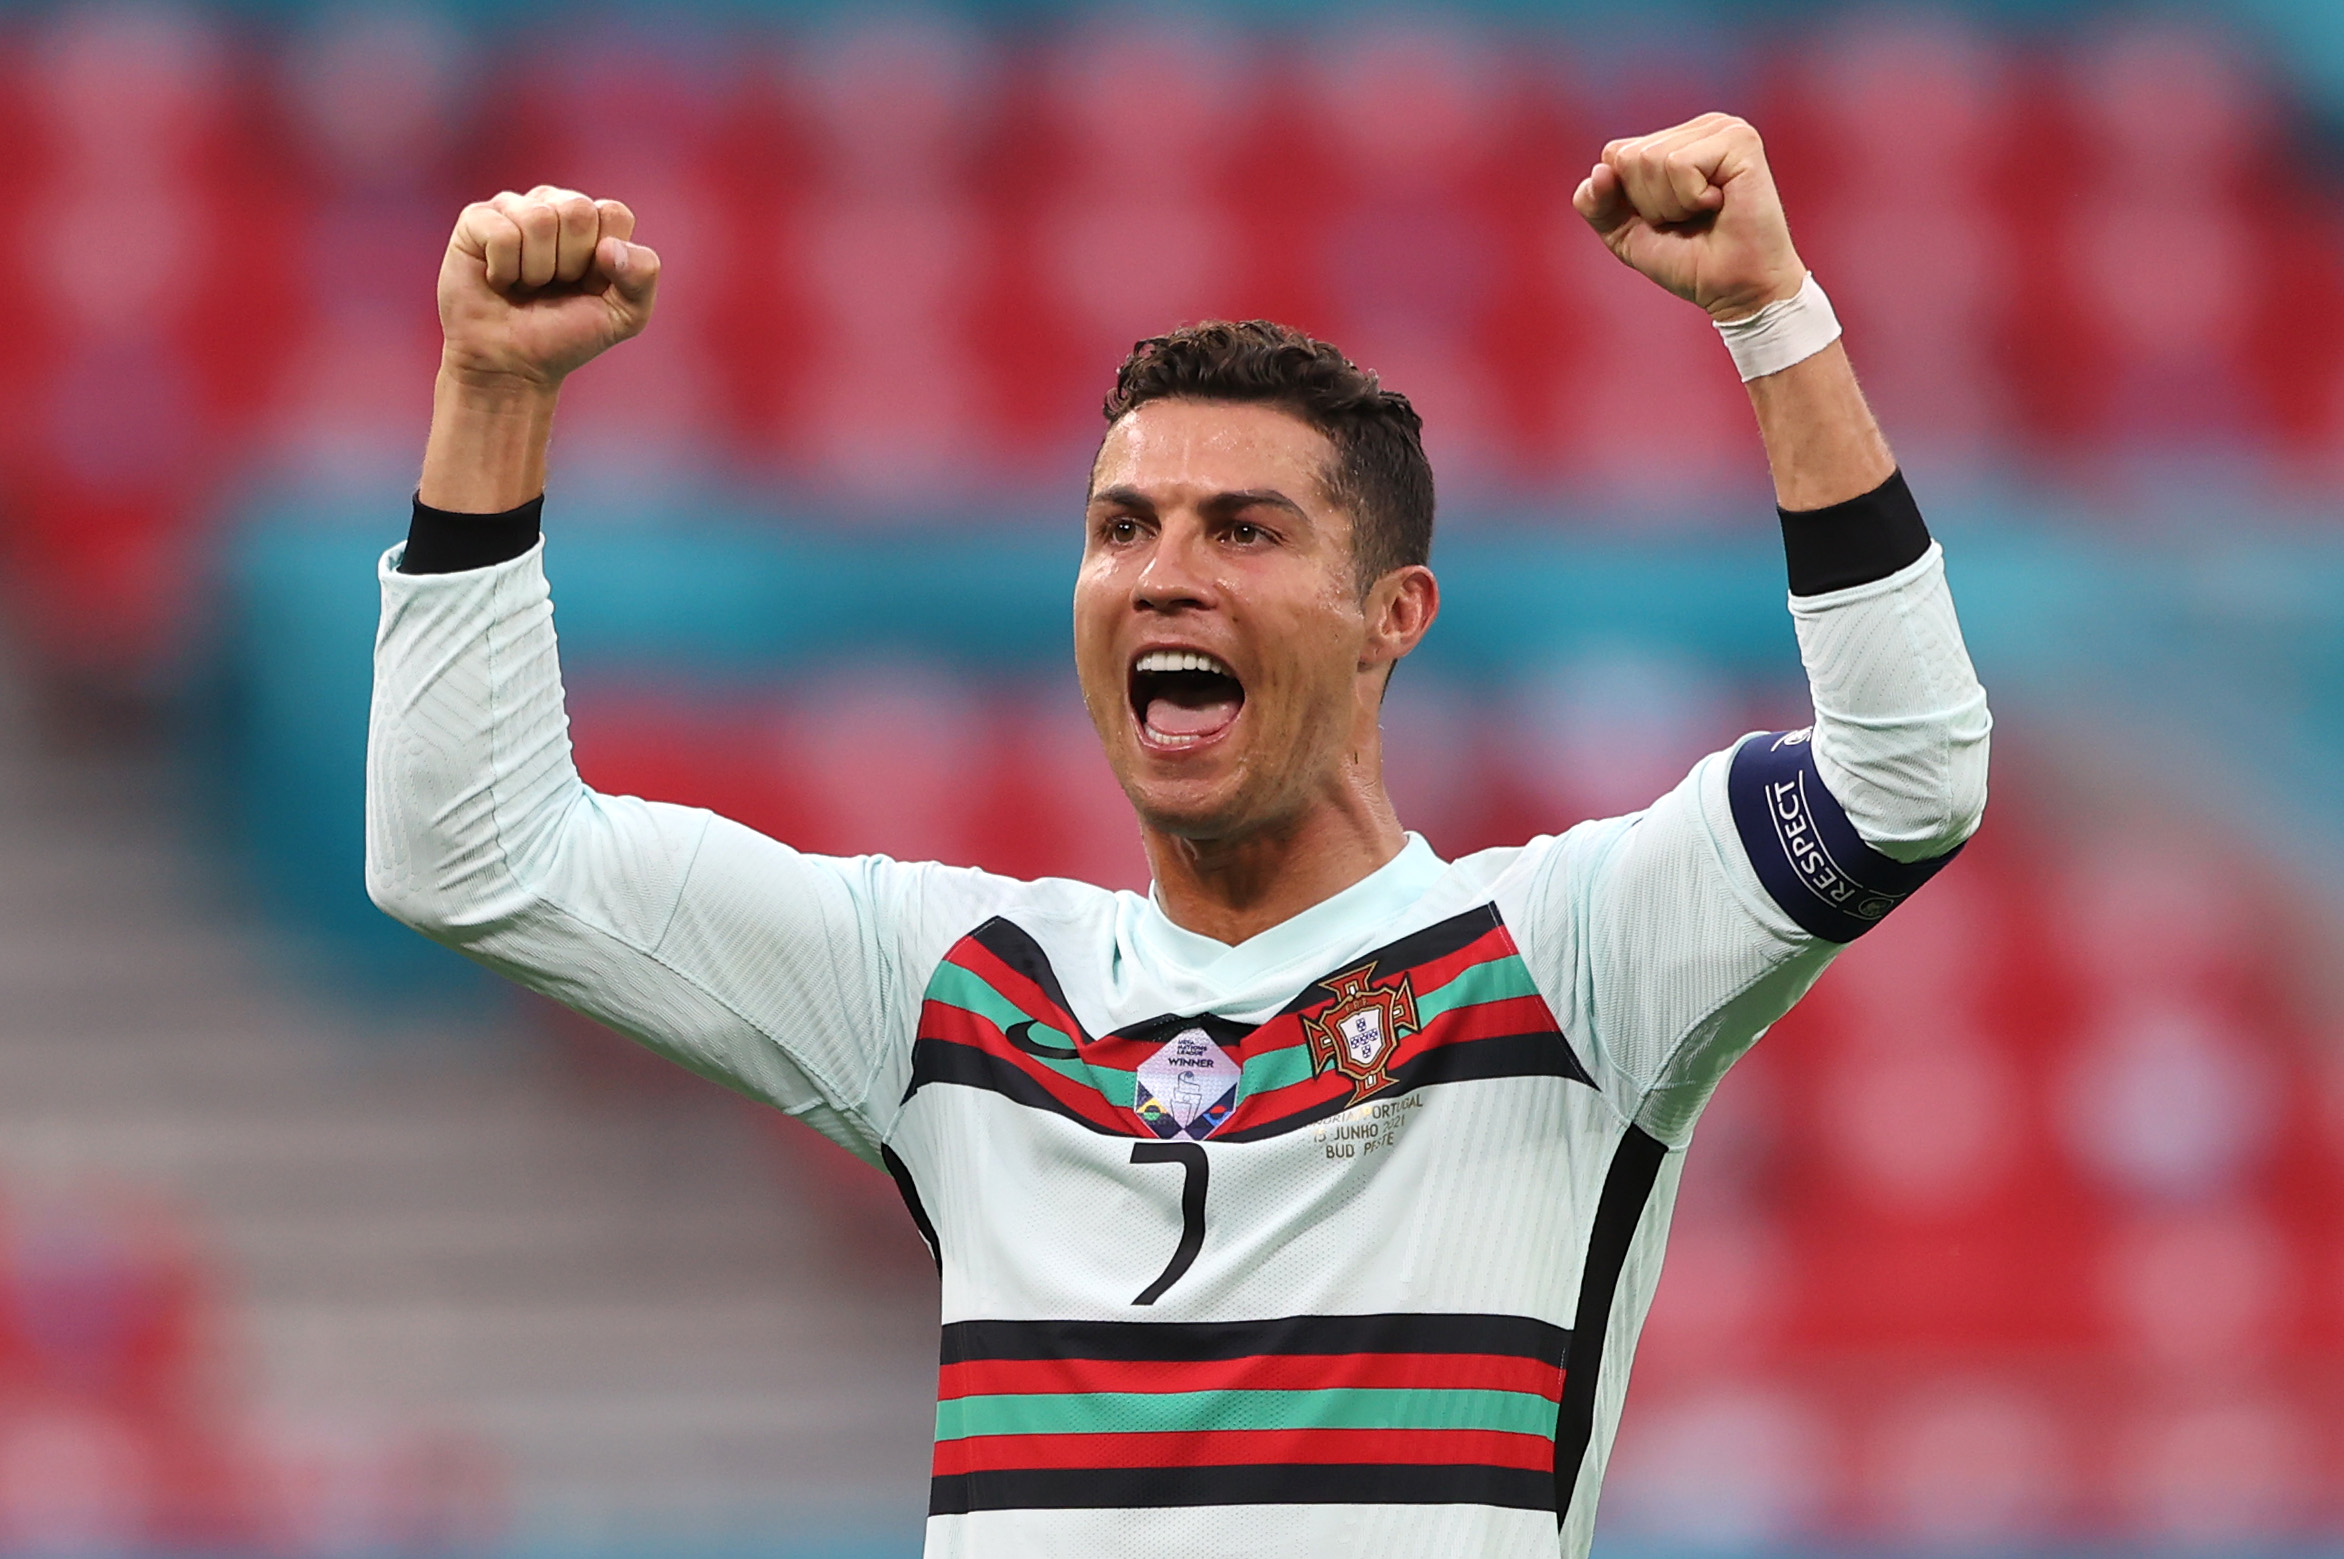 Nike Beats Adidas For Winner of 2022 World Cup Jersey Battle - Bloomberg